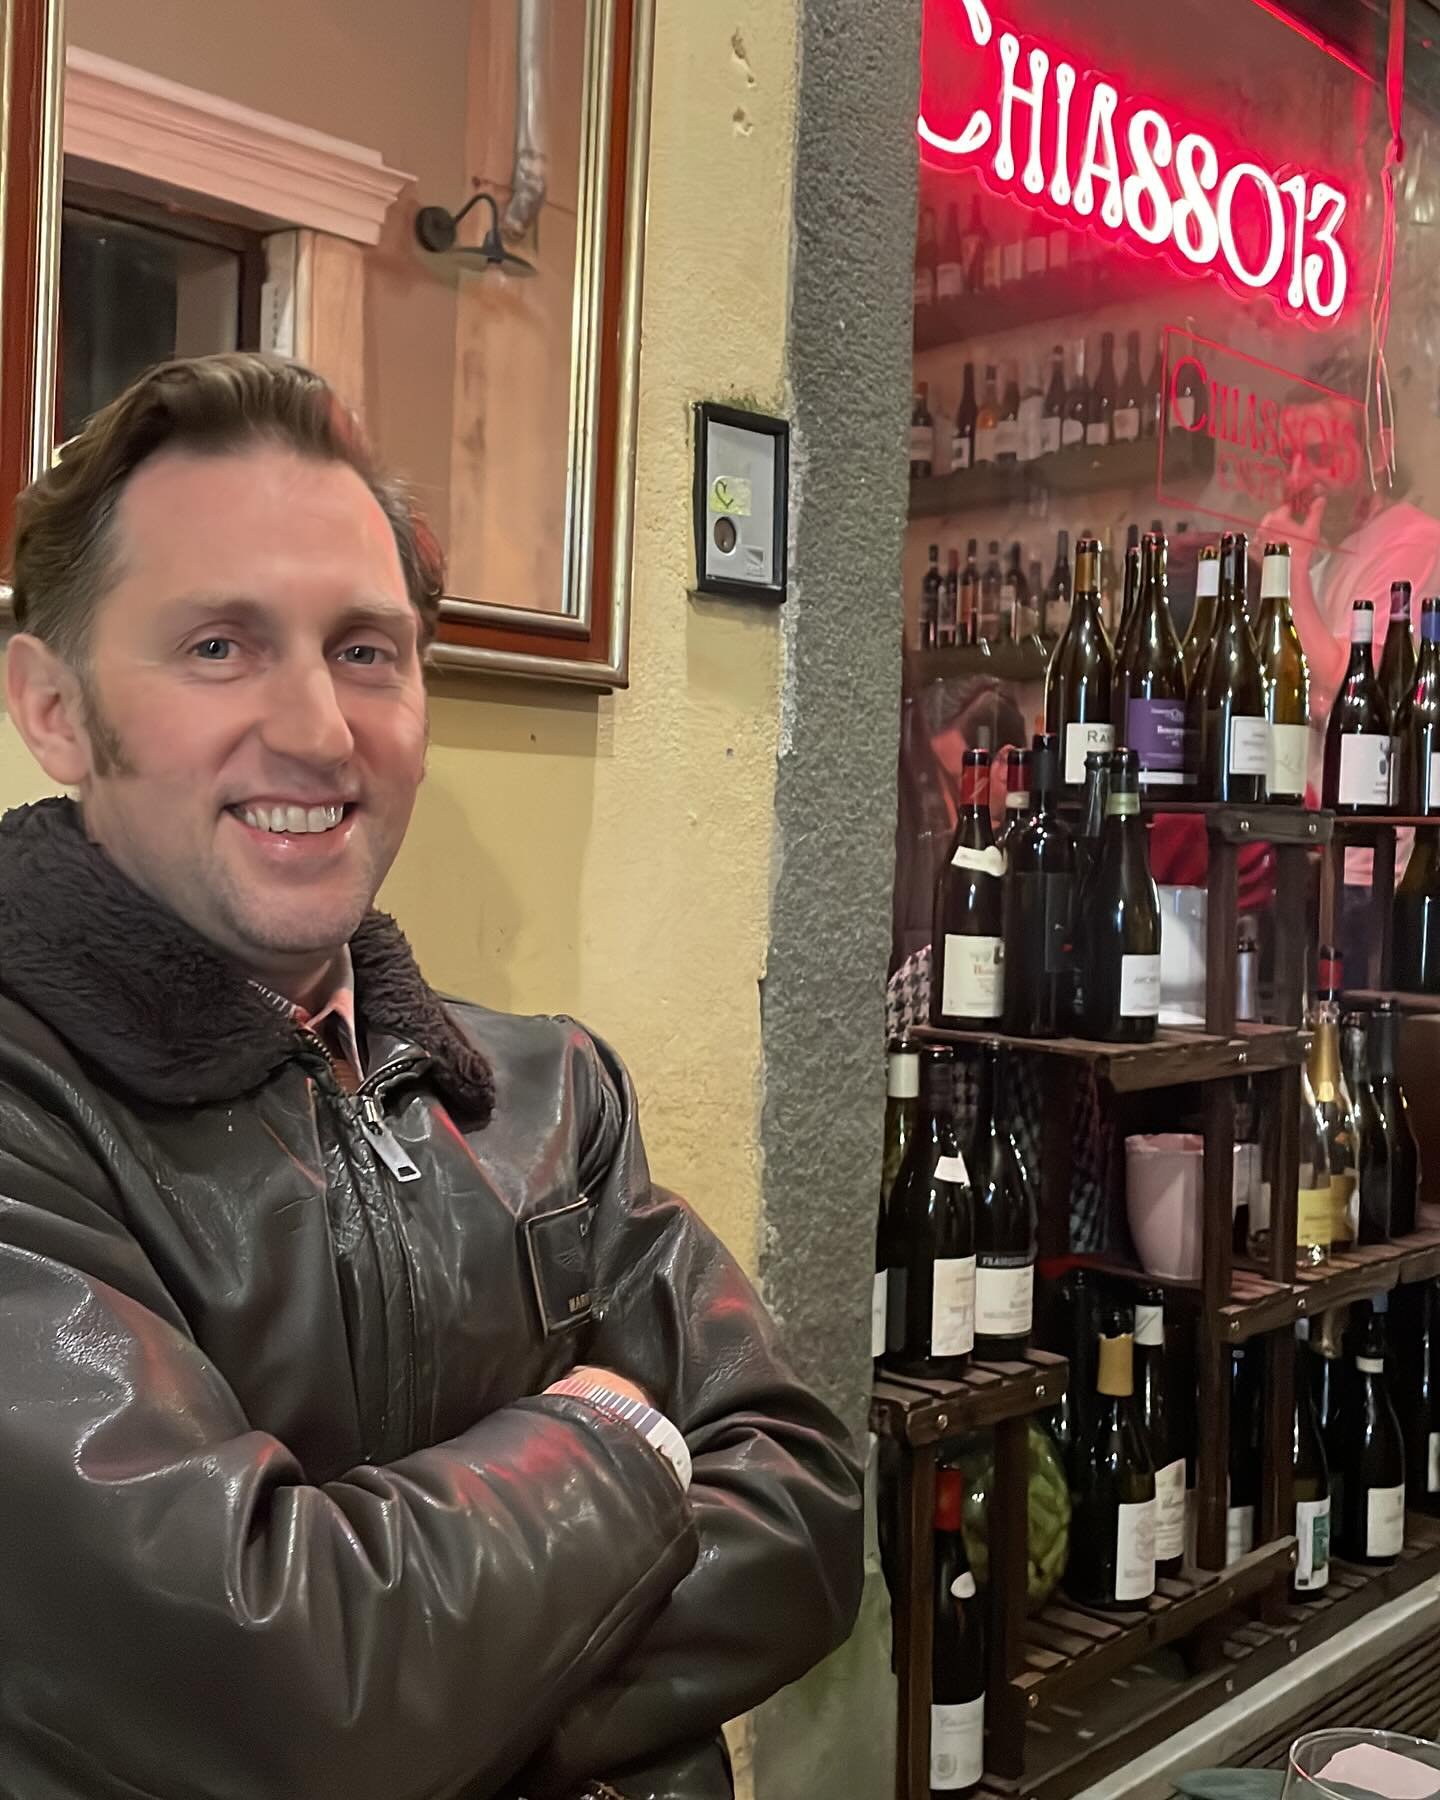 We arrived in Lucca on Thursday and realised it was a public holiday, we were tired and couldn&rsquo;t get a table anywhere and then we came upon this wine bar/restaurant @chiasso13, down a small street, the owner squeezed us on a table outside, the 